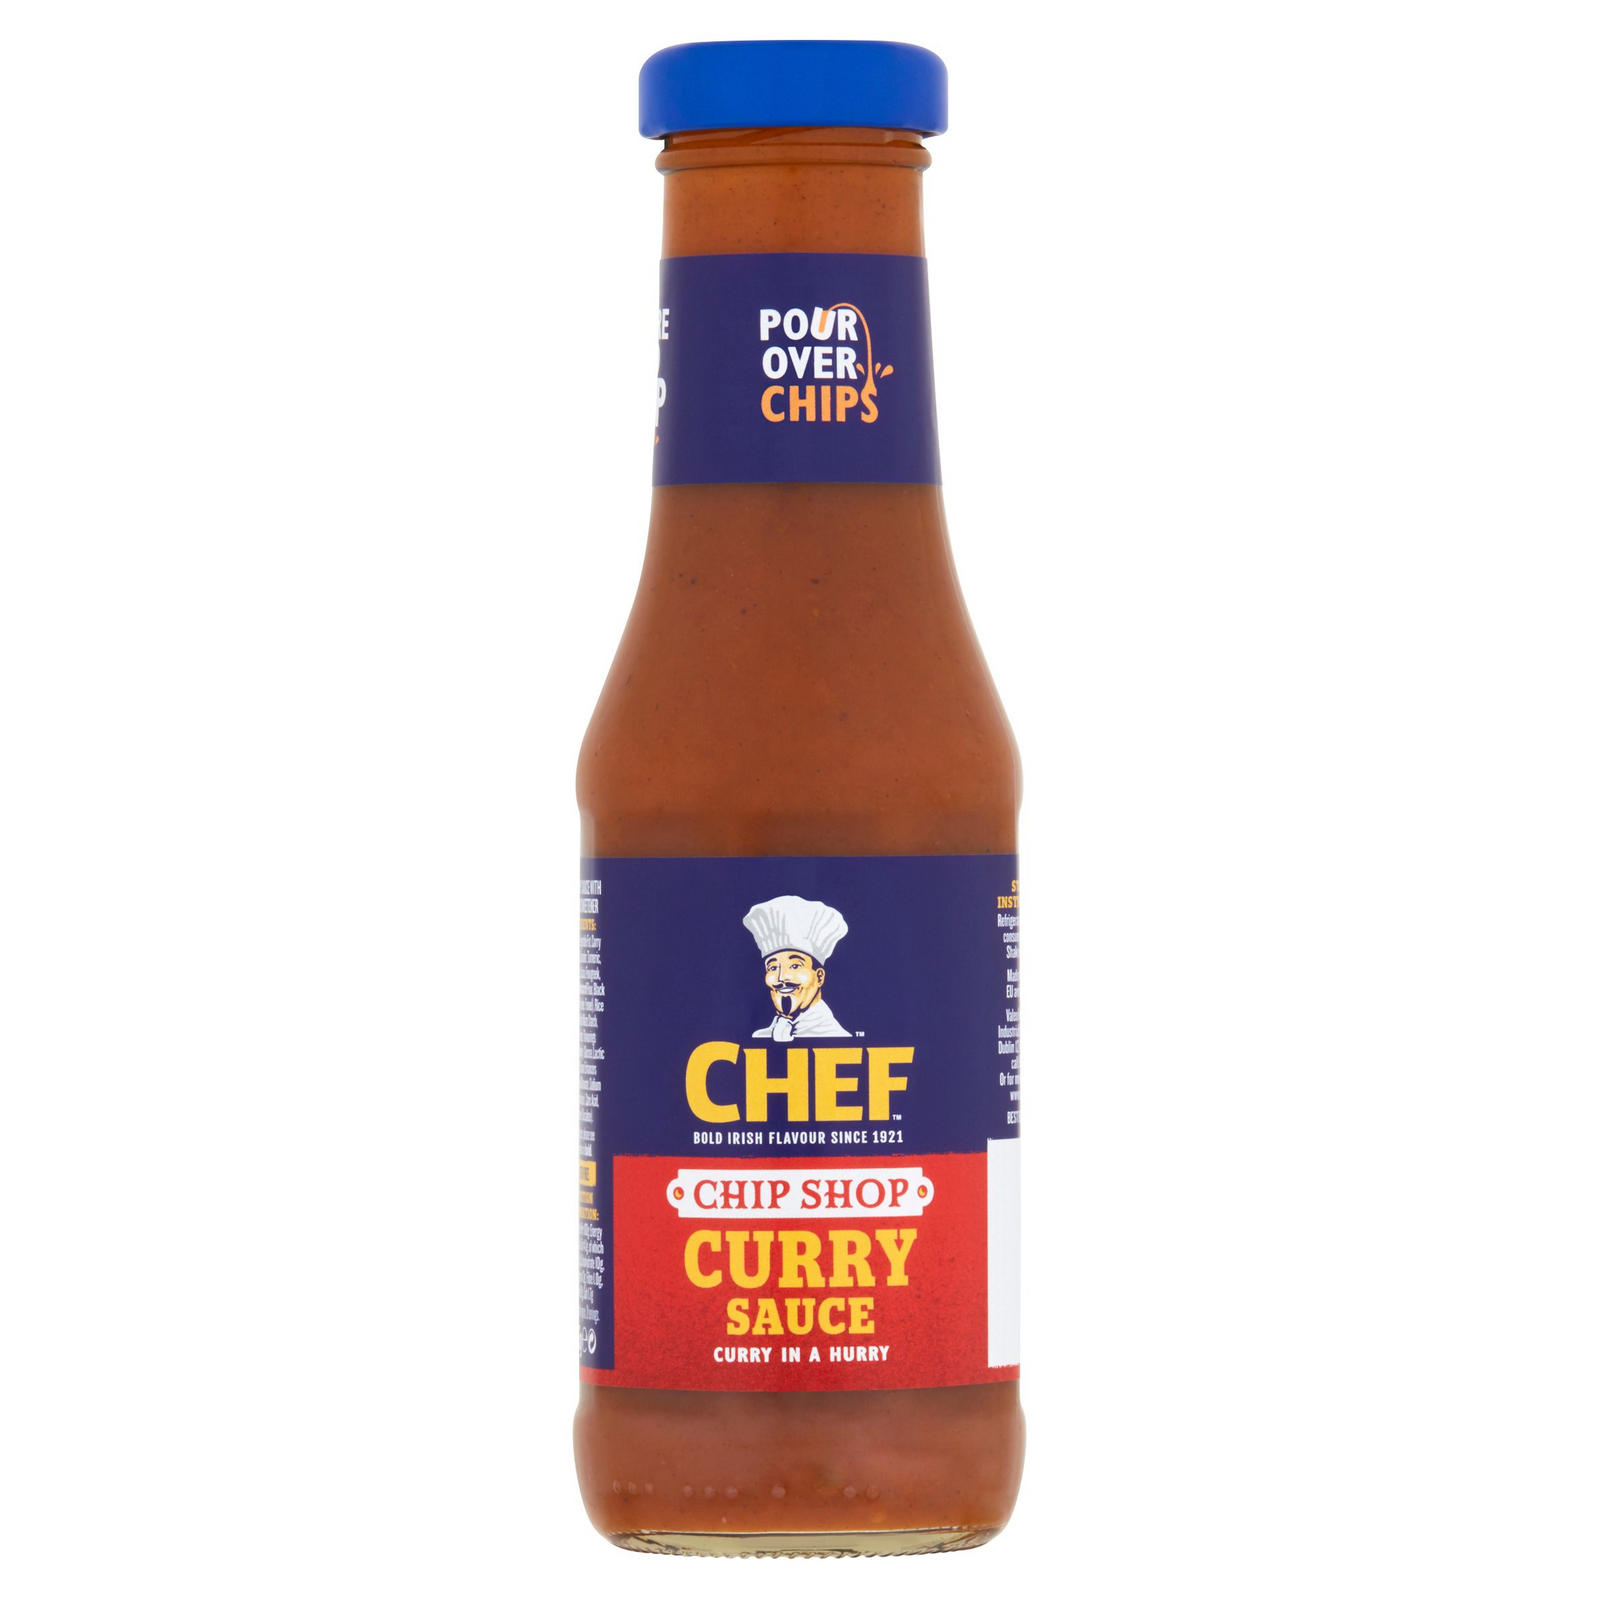 Chef Chip Shop Curry Sauce 325g Bottle | Indian and Curry Sauces ...